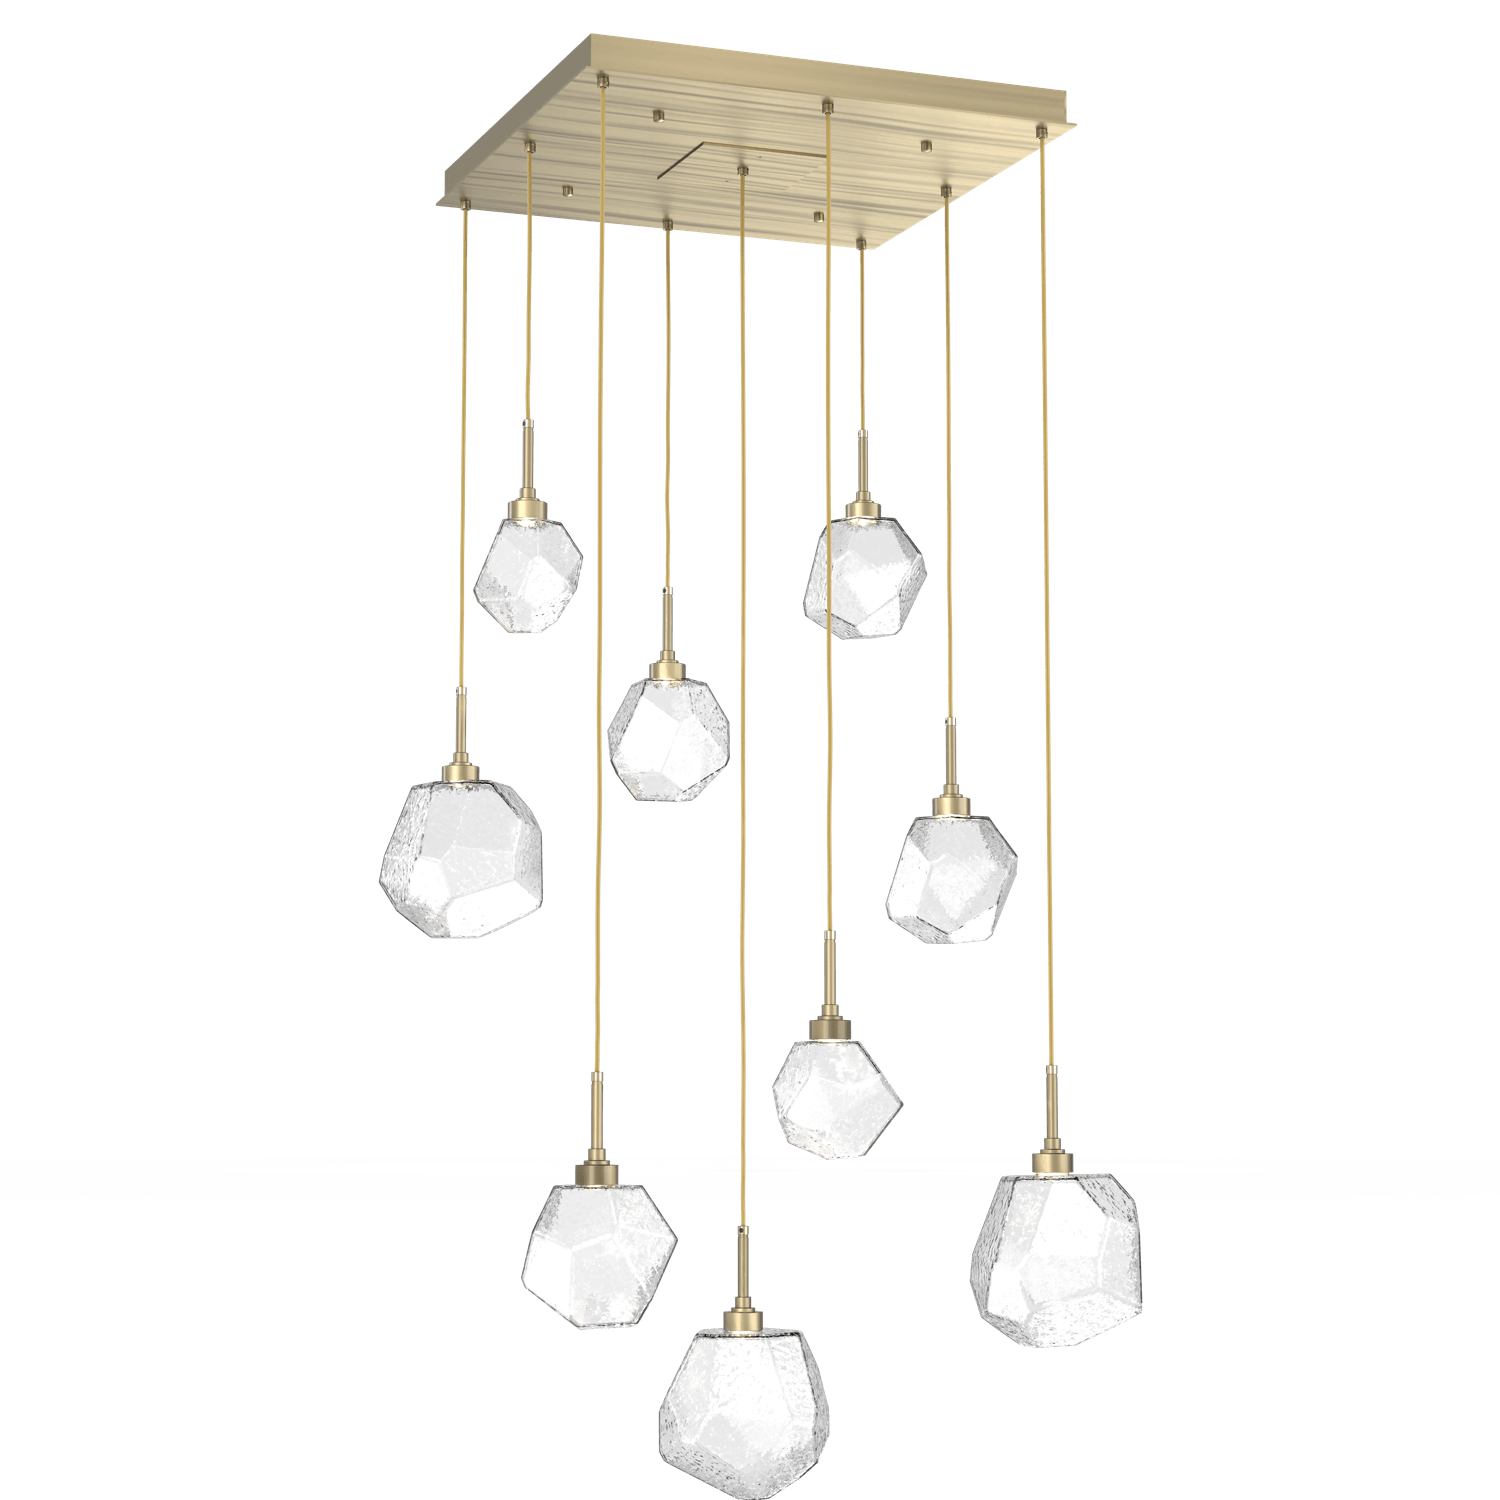 CHB0039-09-HB-C-Hammerton-Studio-Gem-9-light-square-pendant-chandelier-with-heritage-brass-finish-and-clear-blown-glass-shades-and-LED-lamping